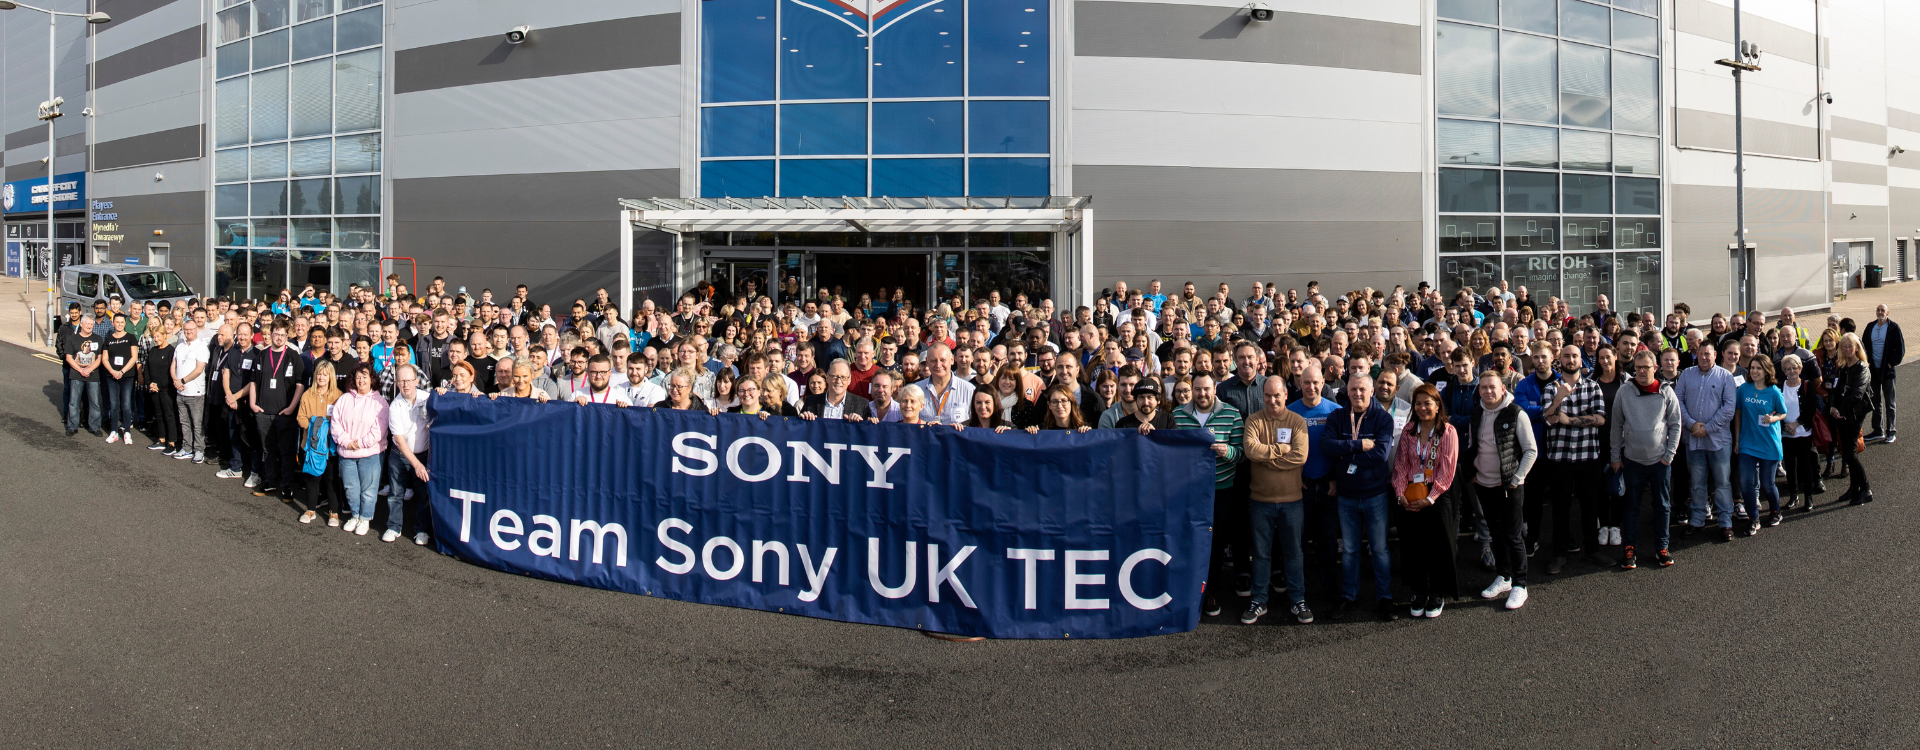 A photo of approximately 500 people standing in one group in front of the Cardiff City Football Club Stadium building. In front of them is a blue banner with the text 